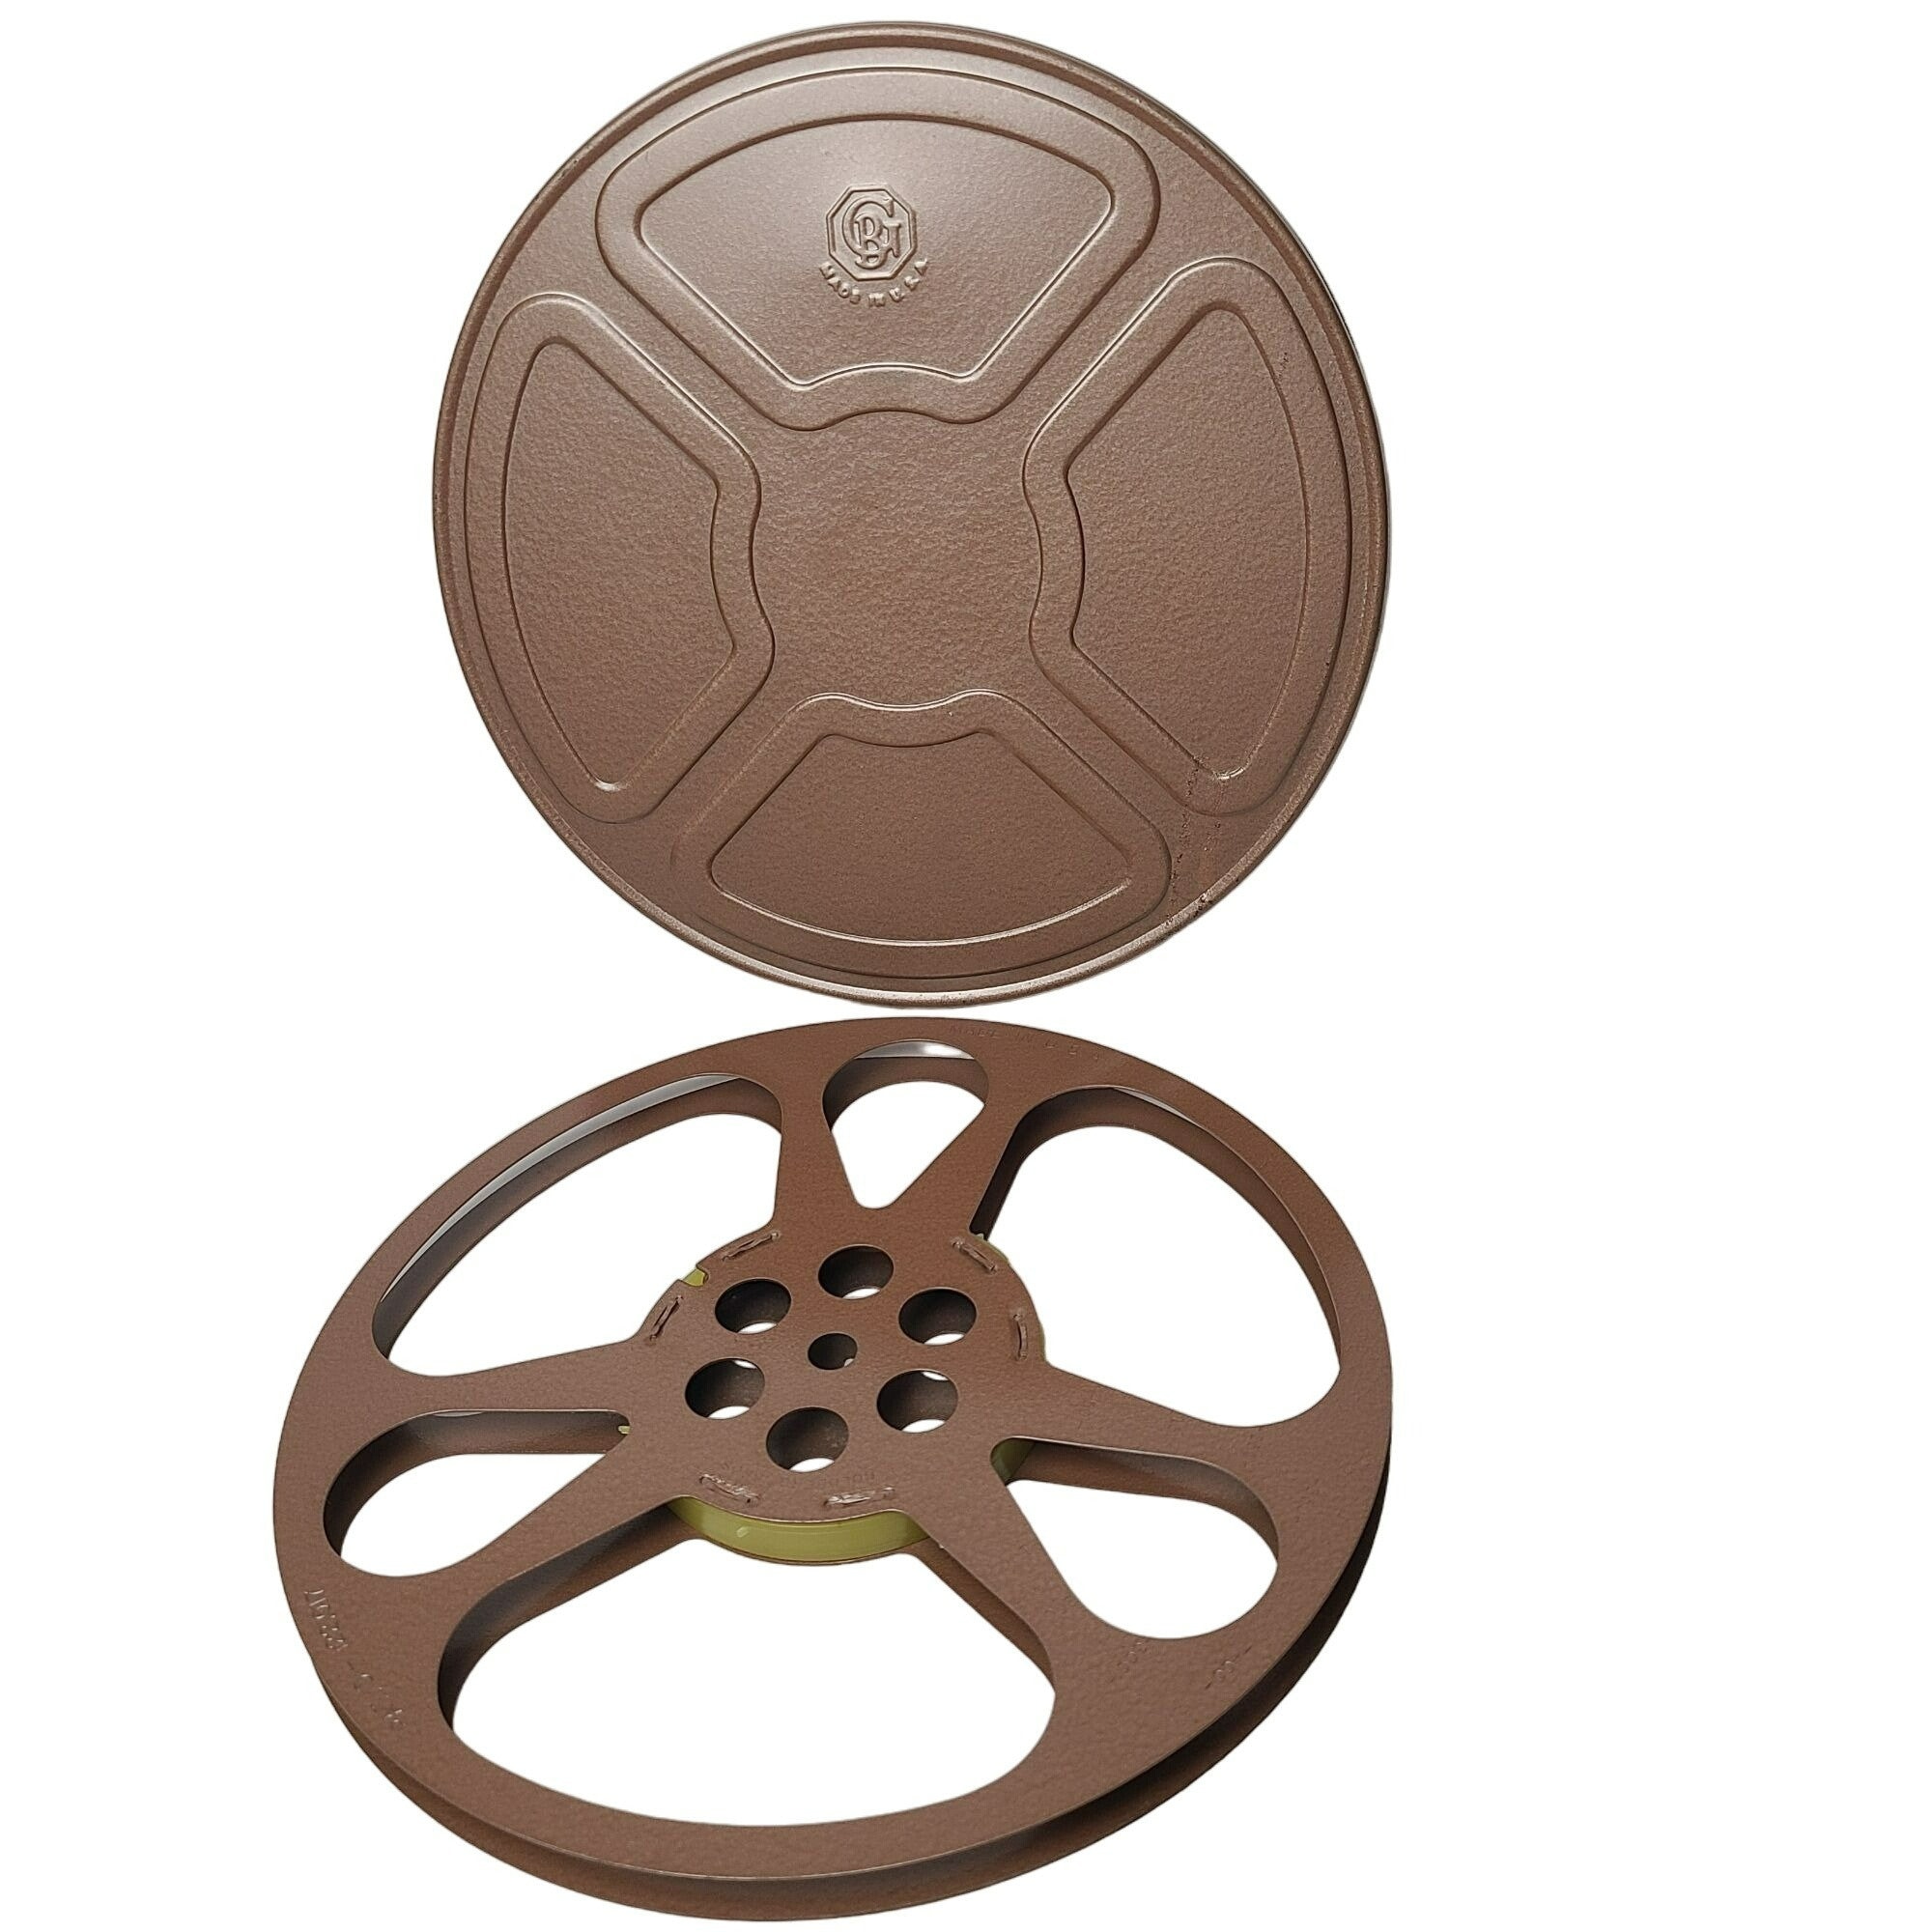 5 3/4 Inch Metal 8mm Film Reel And Metal Storage Canister.